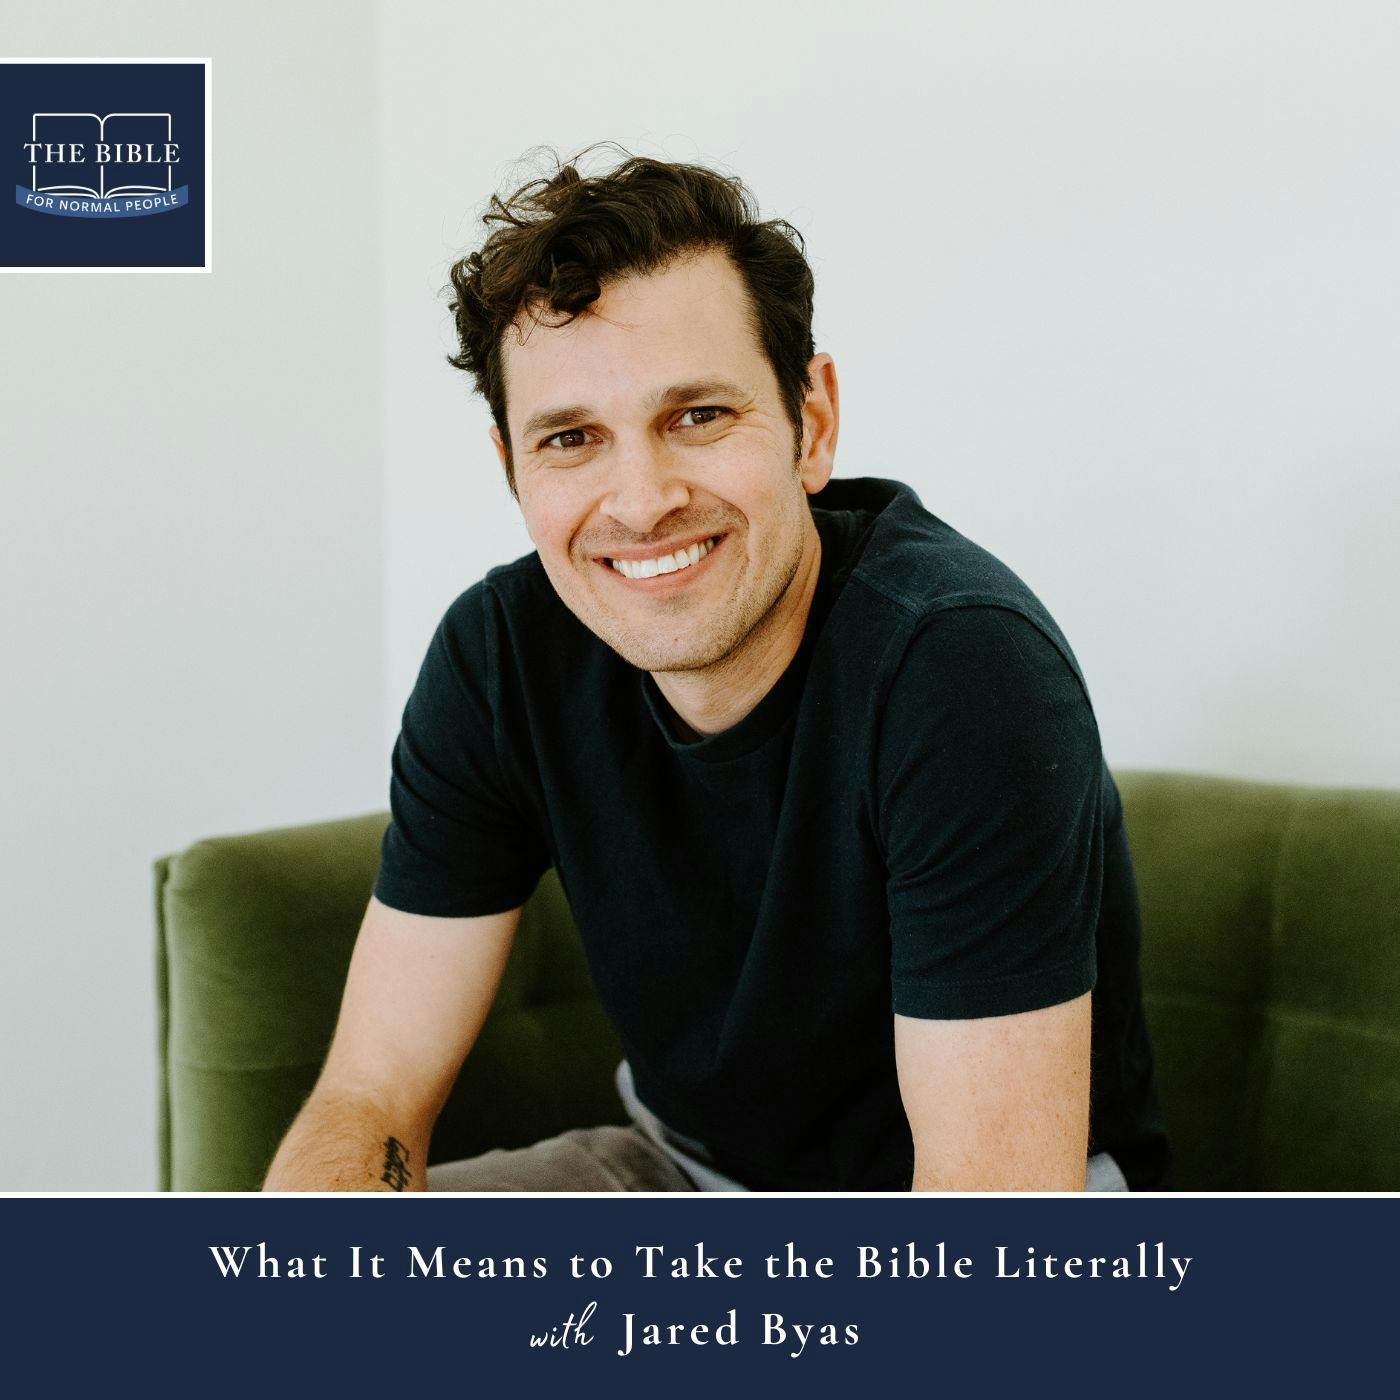 [Bible] Episode 247: Jared Byas - What It Means to Take the Bible Literally